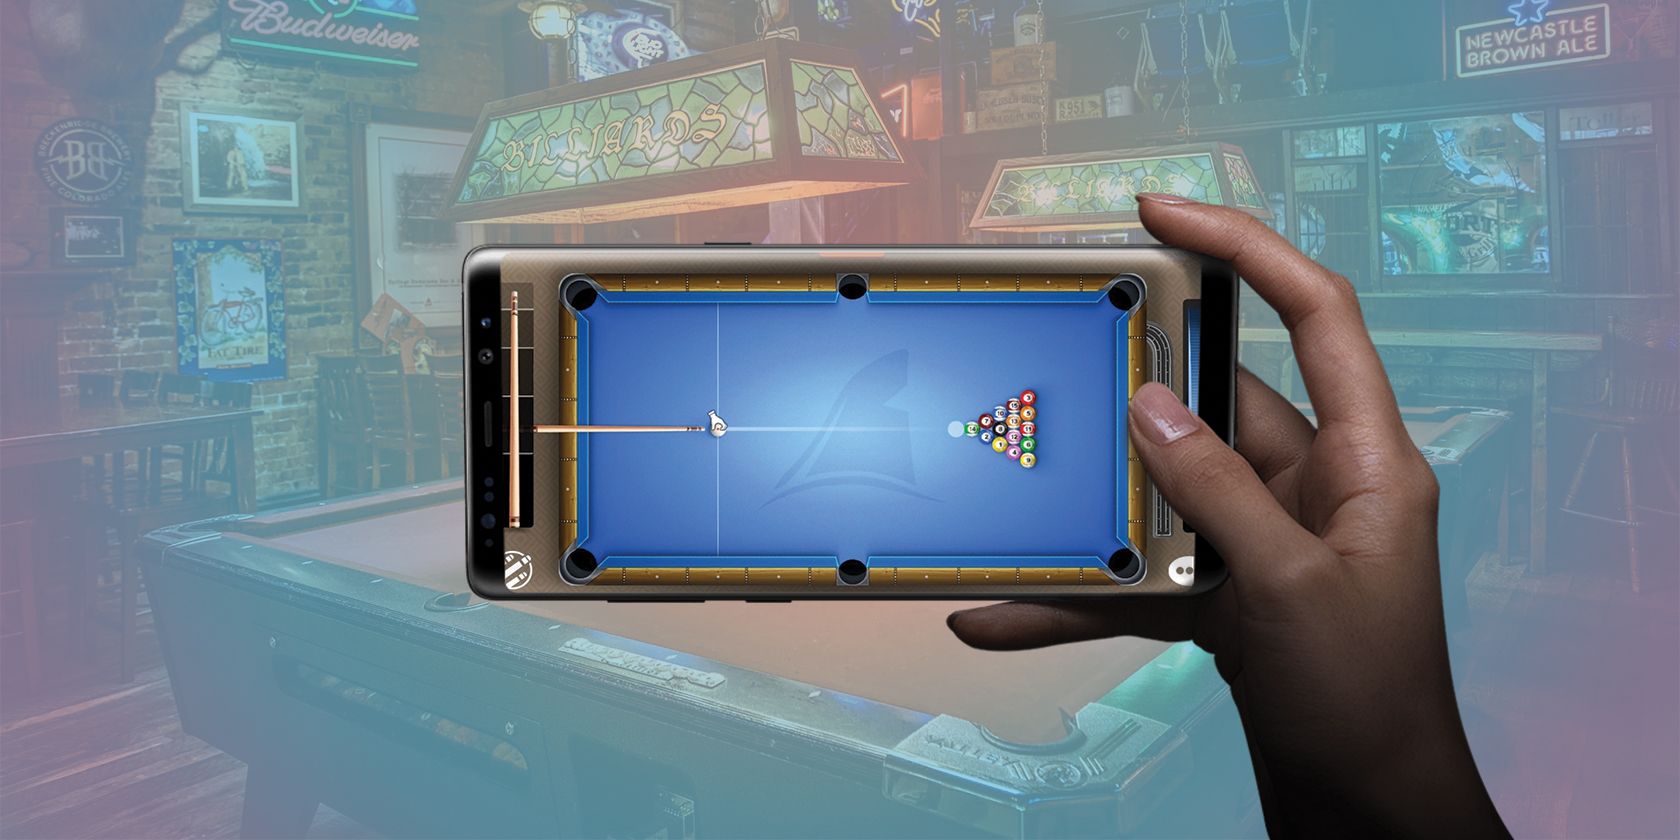 Aim Pool - for 8 Ball Pool for Android - Download